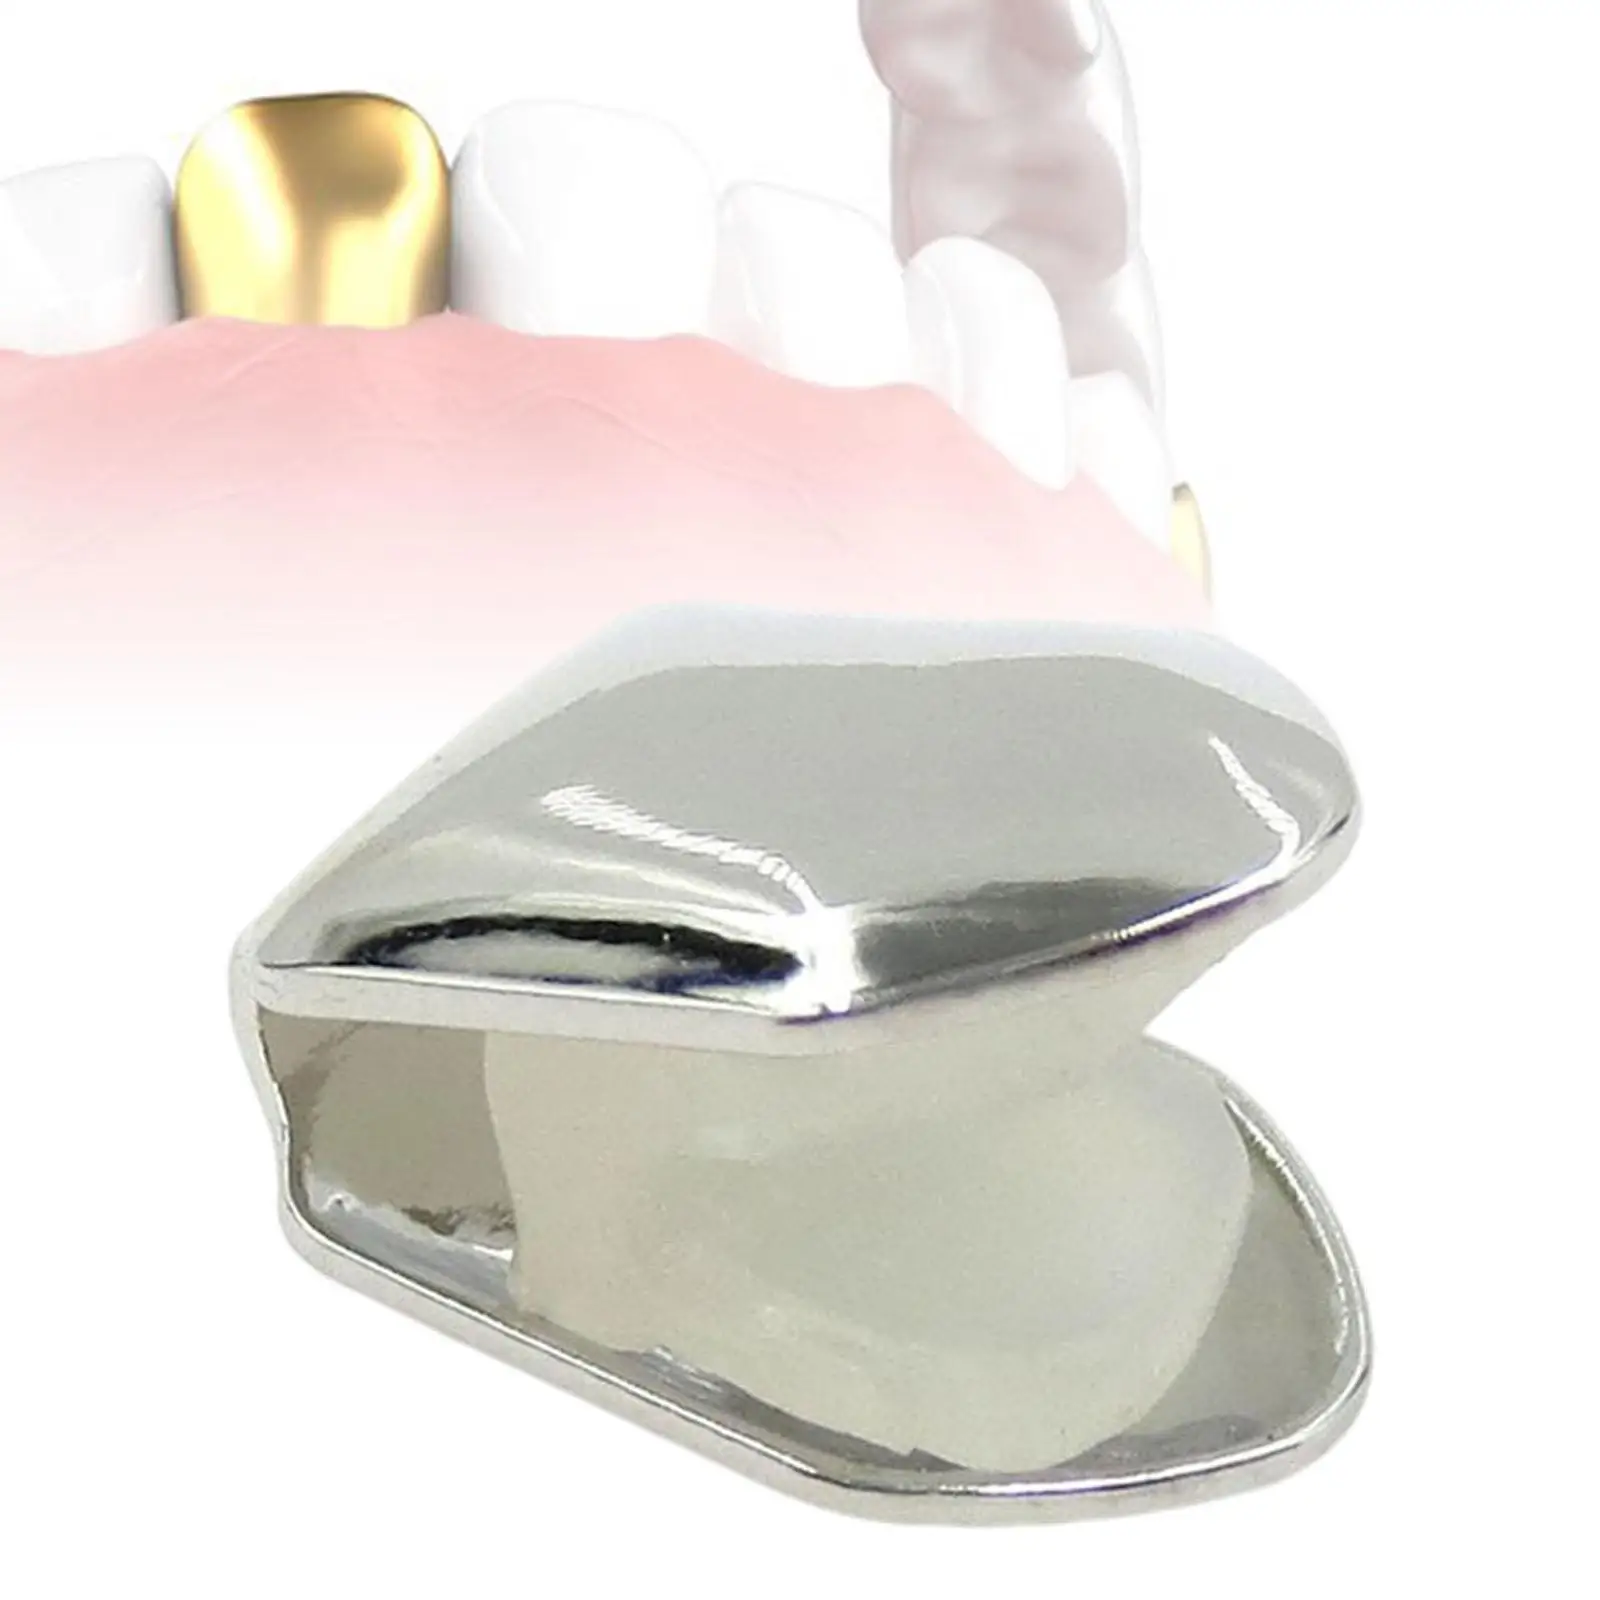 Single Tooth CAPs Hip Hop Grills for Teeth Mouth Rapper Party Accessories Gold Plated Small Single Tooth Caps False Teeth